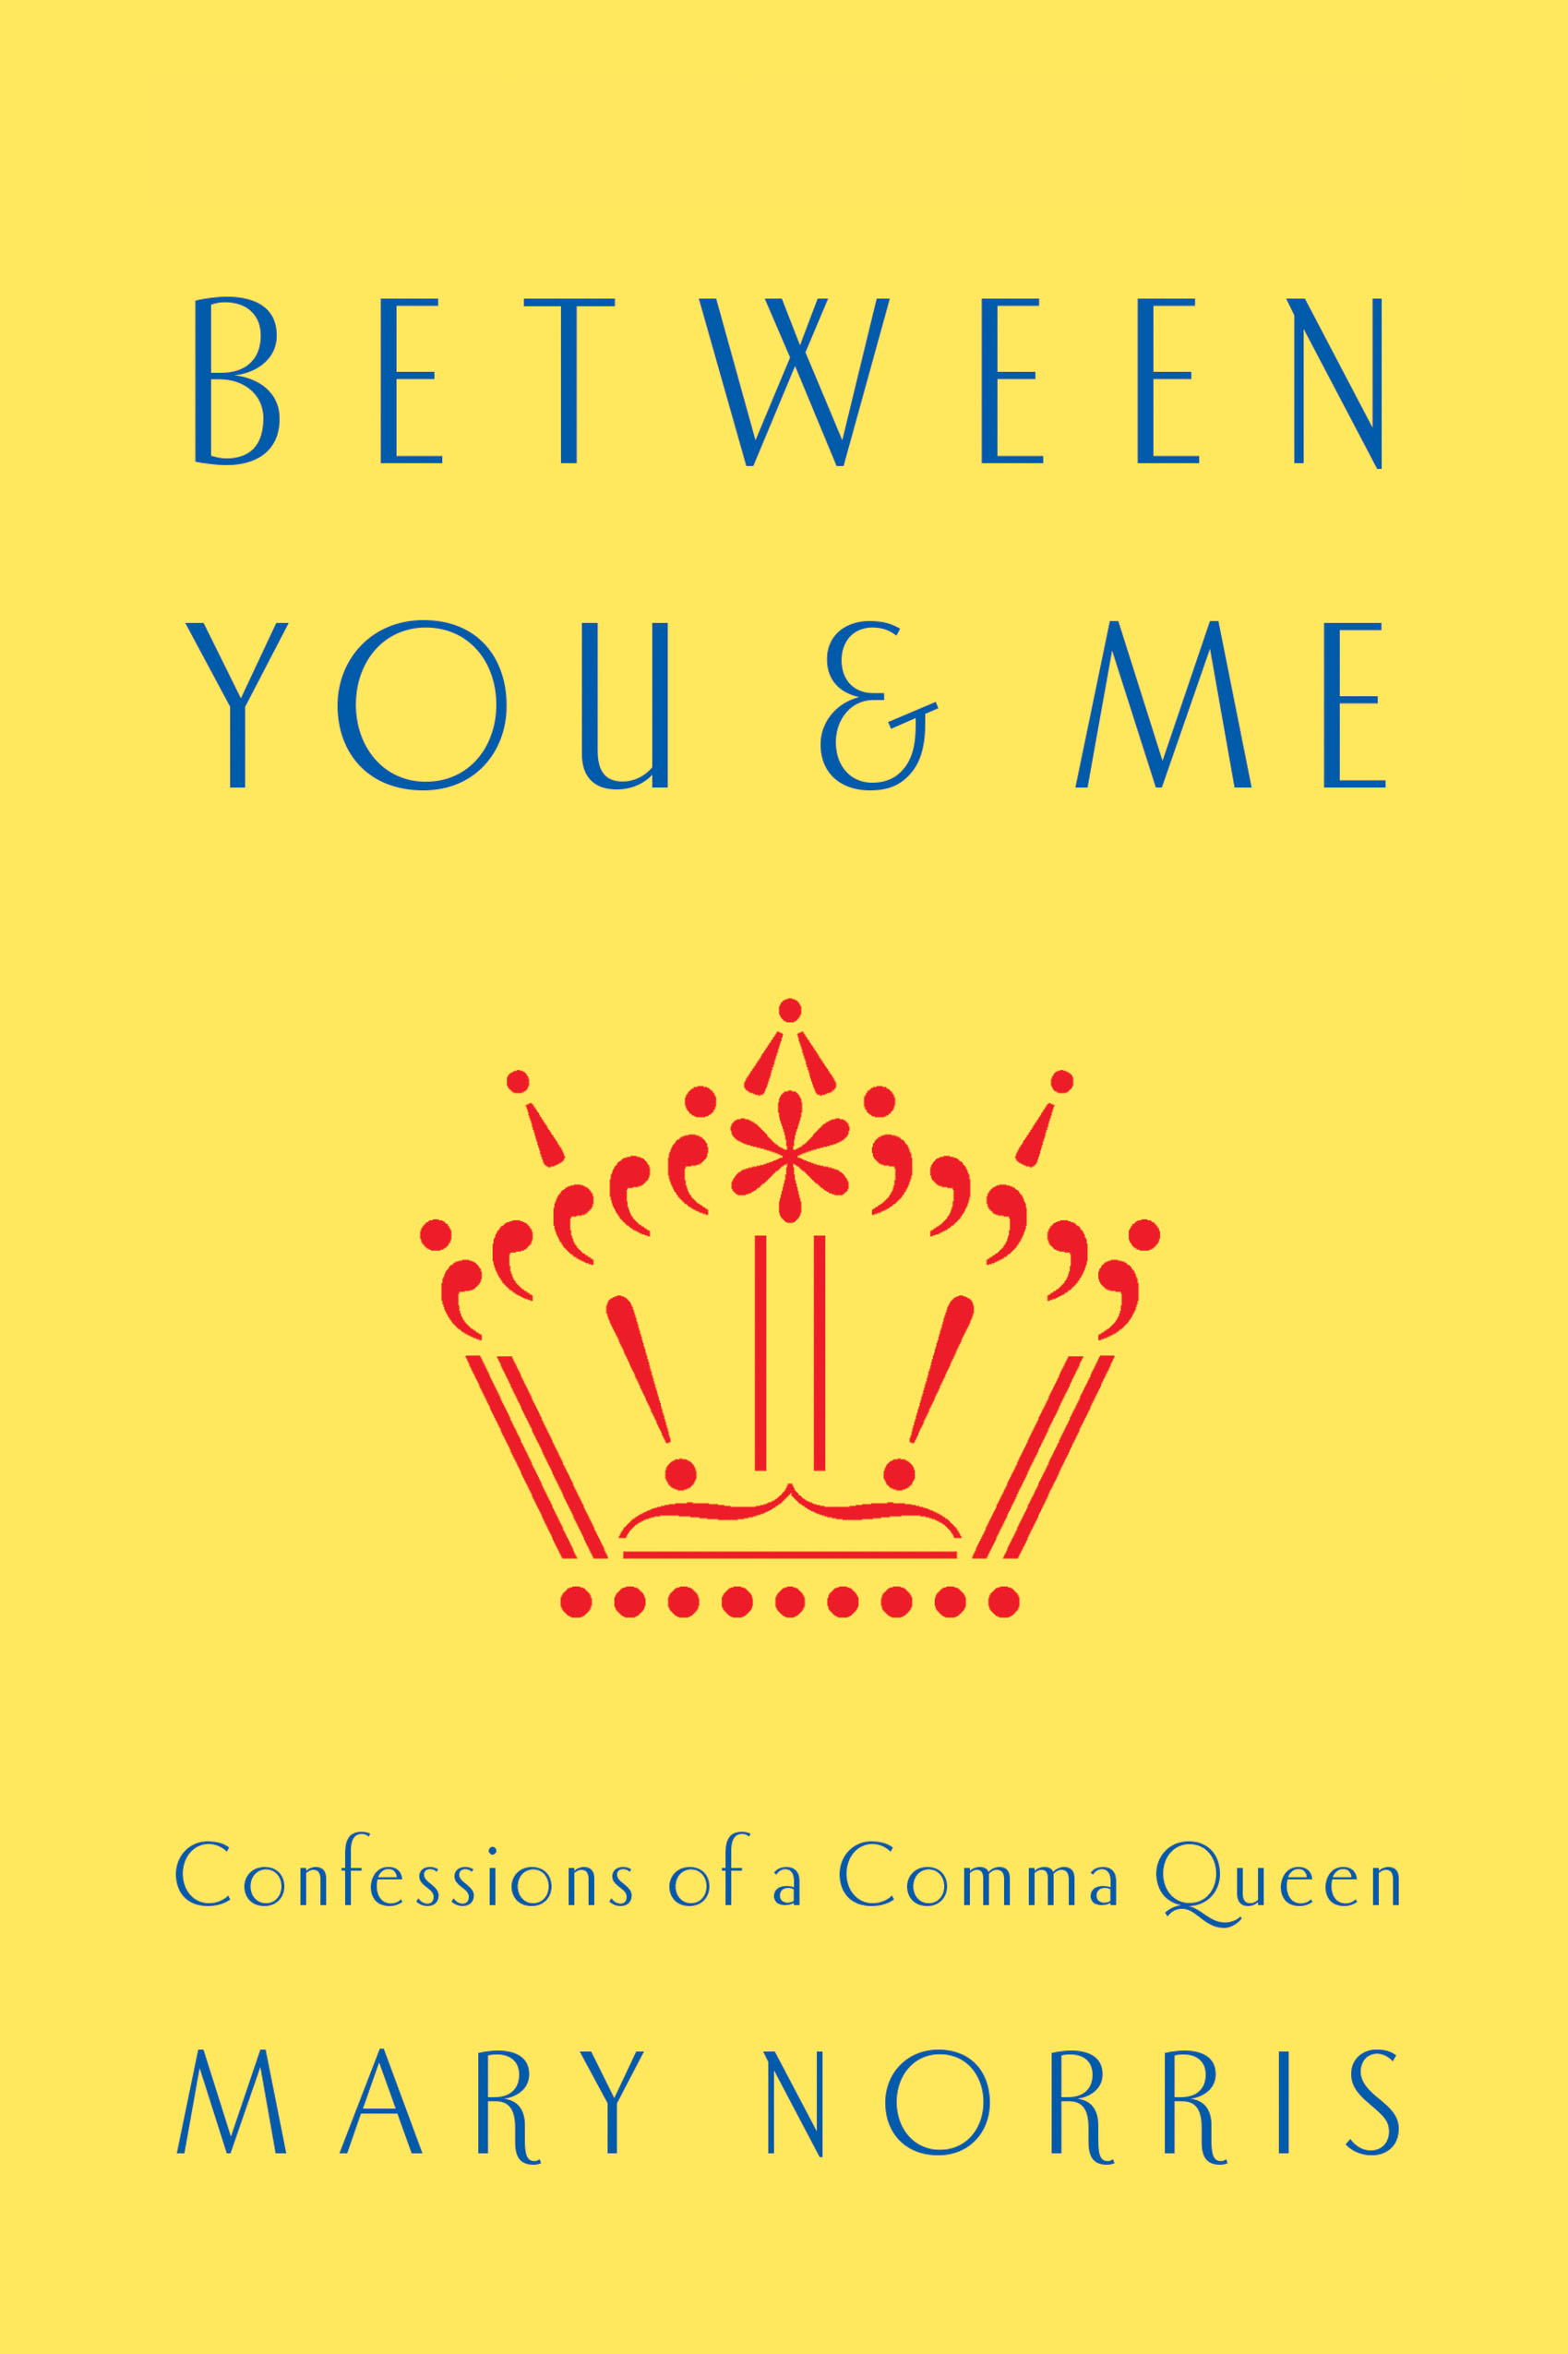 Between You & Me by Mary Norris